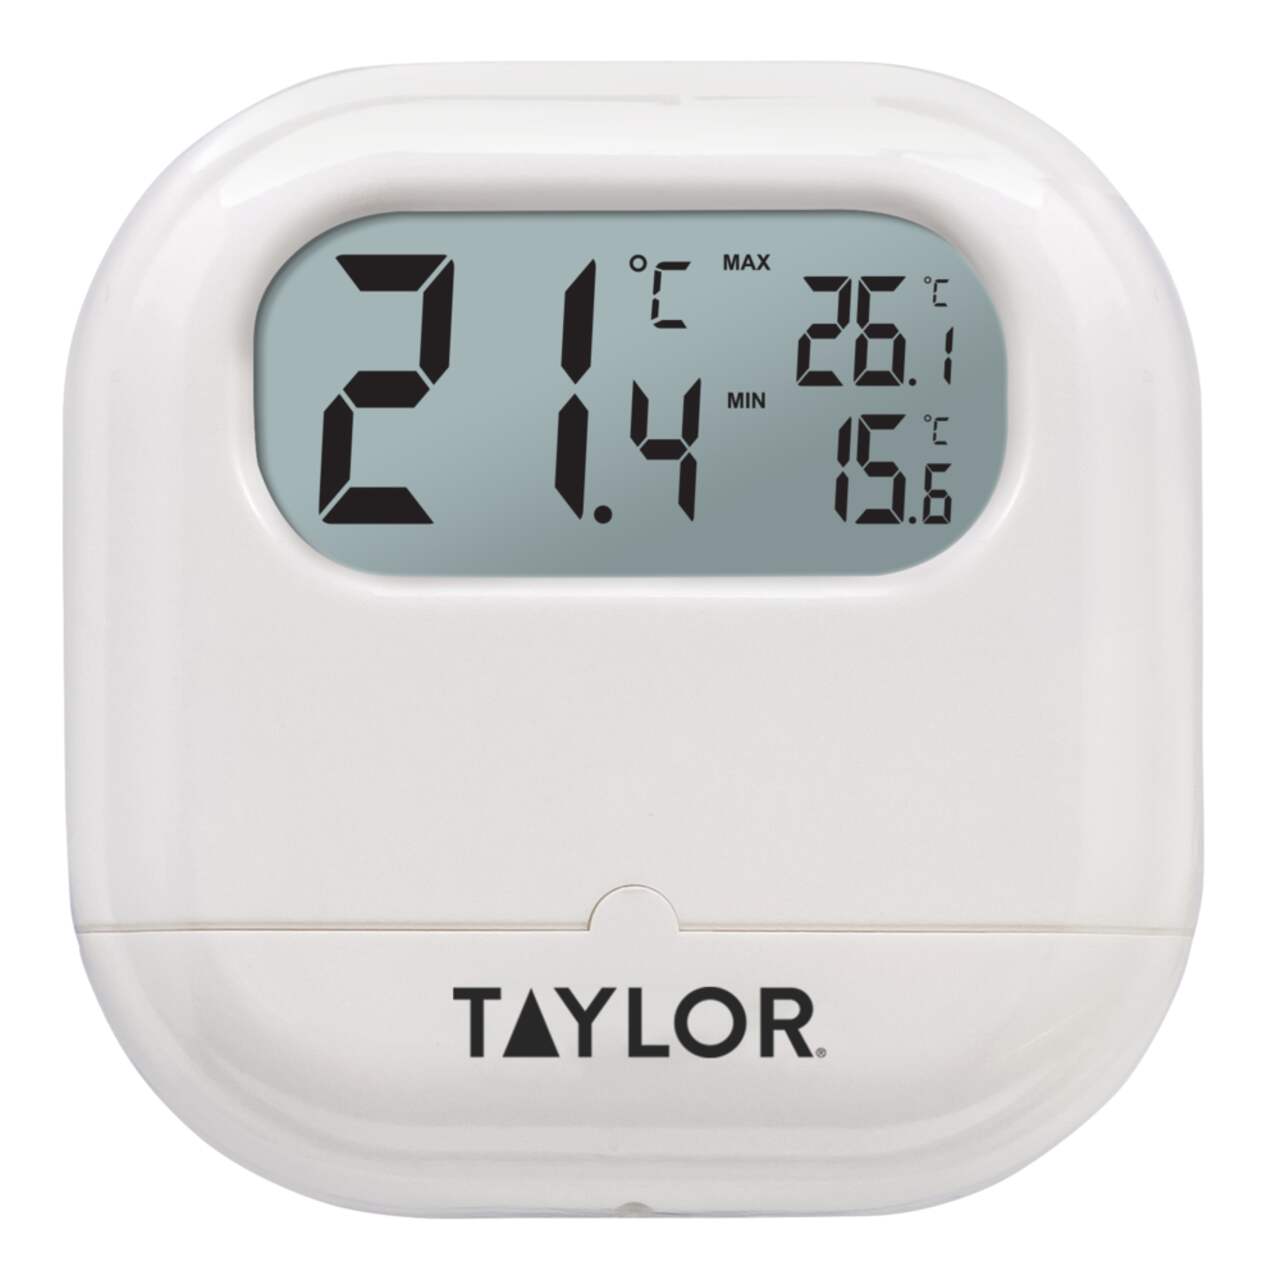 https://media-www.canadiantire.ca/product/living/kitchen/kitchen-tools-thermometers/0429125/accutemp-dual-mounting-indoor-or-outdoor-thermometer-e50789c7-3009-41ed-ae55-f5da3a96cd6c.png?imdensity=1&imwidth=640&impolicy=mZoom